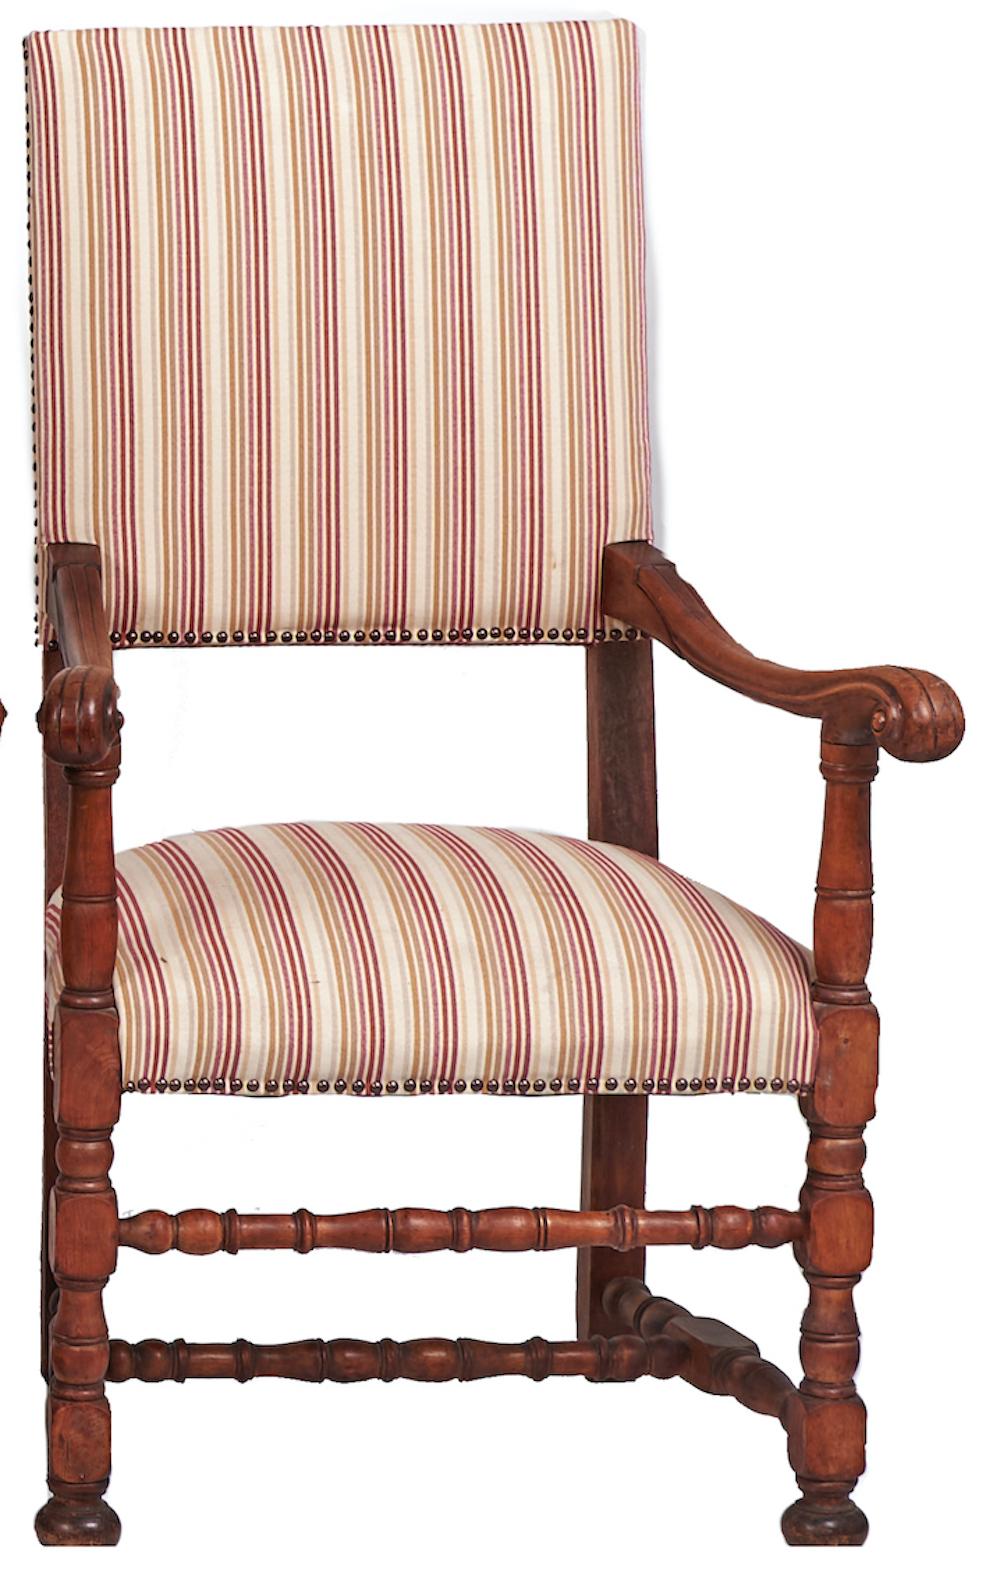 A fine set of eight fruitwood chairs, late 19th century, in the Louis XIV style.

Just purchased, the set including four armchairs with scroll arms, all on baluster-and-block legs united by similarly turned stretchers. The modern stripe upholstery